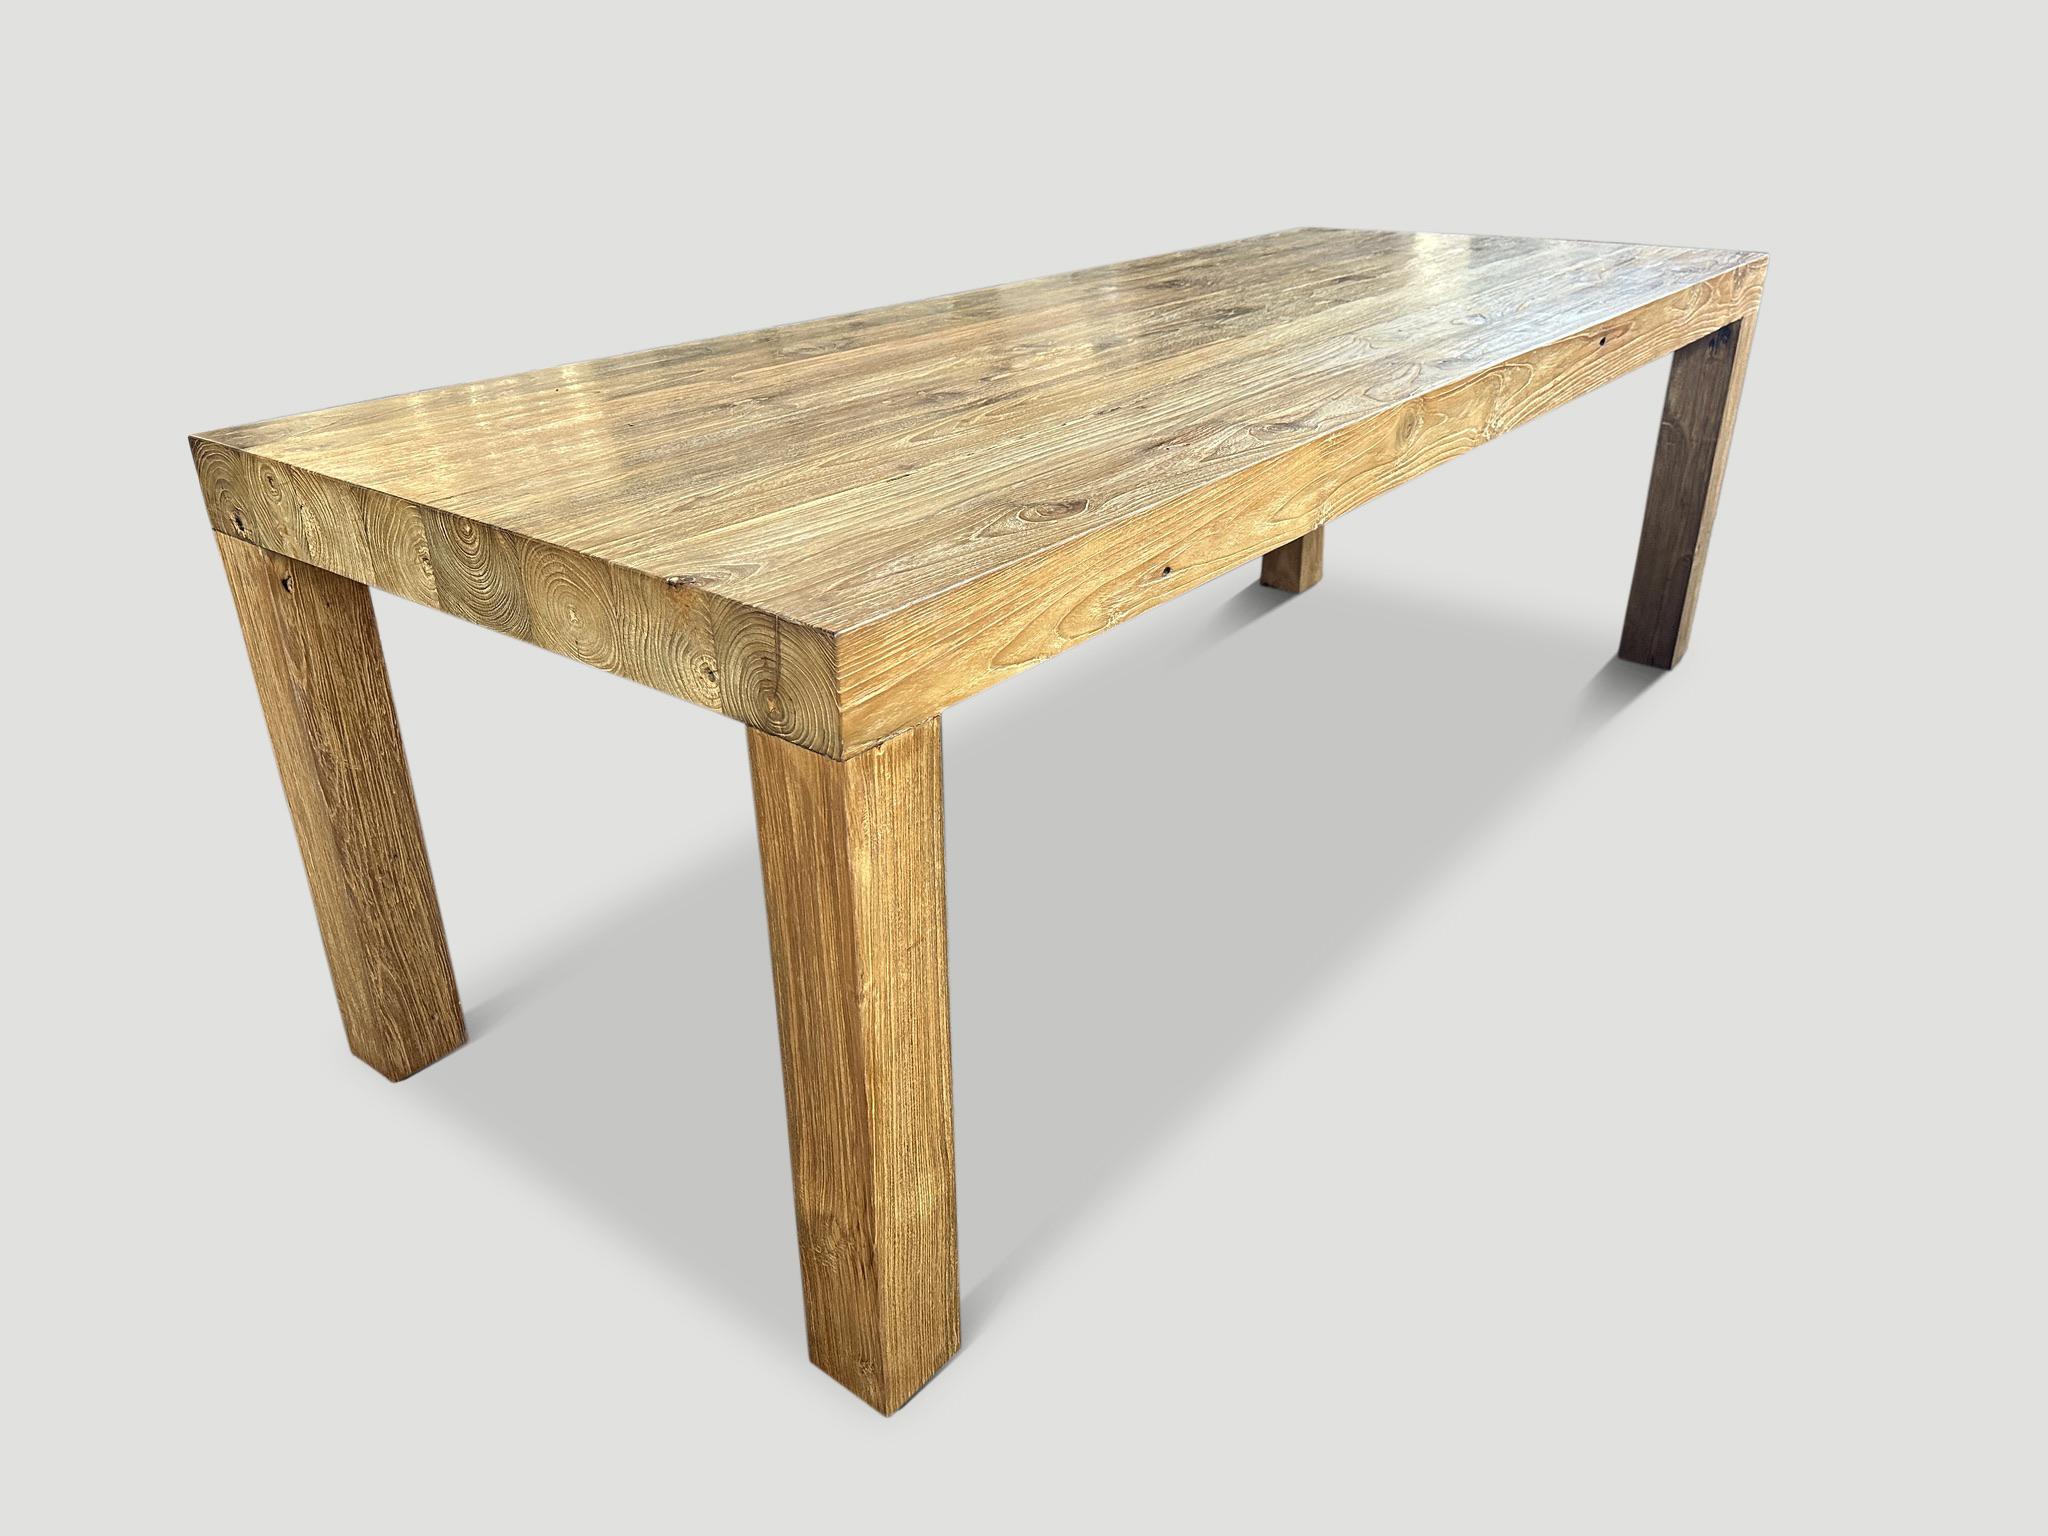 Impressive solid teak dining table hand made from eight 4” x 4” reclaimed teak logs. Finished with a natural oil revealing the beautiful wood grain. 

Own an Andrianna Shamaris original.

Andrianna Shamaris. The Leader In Modern Organic Design. 